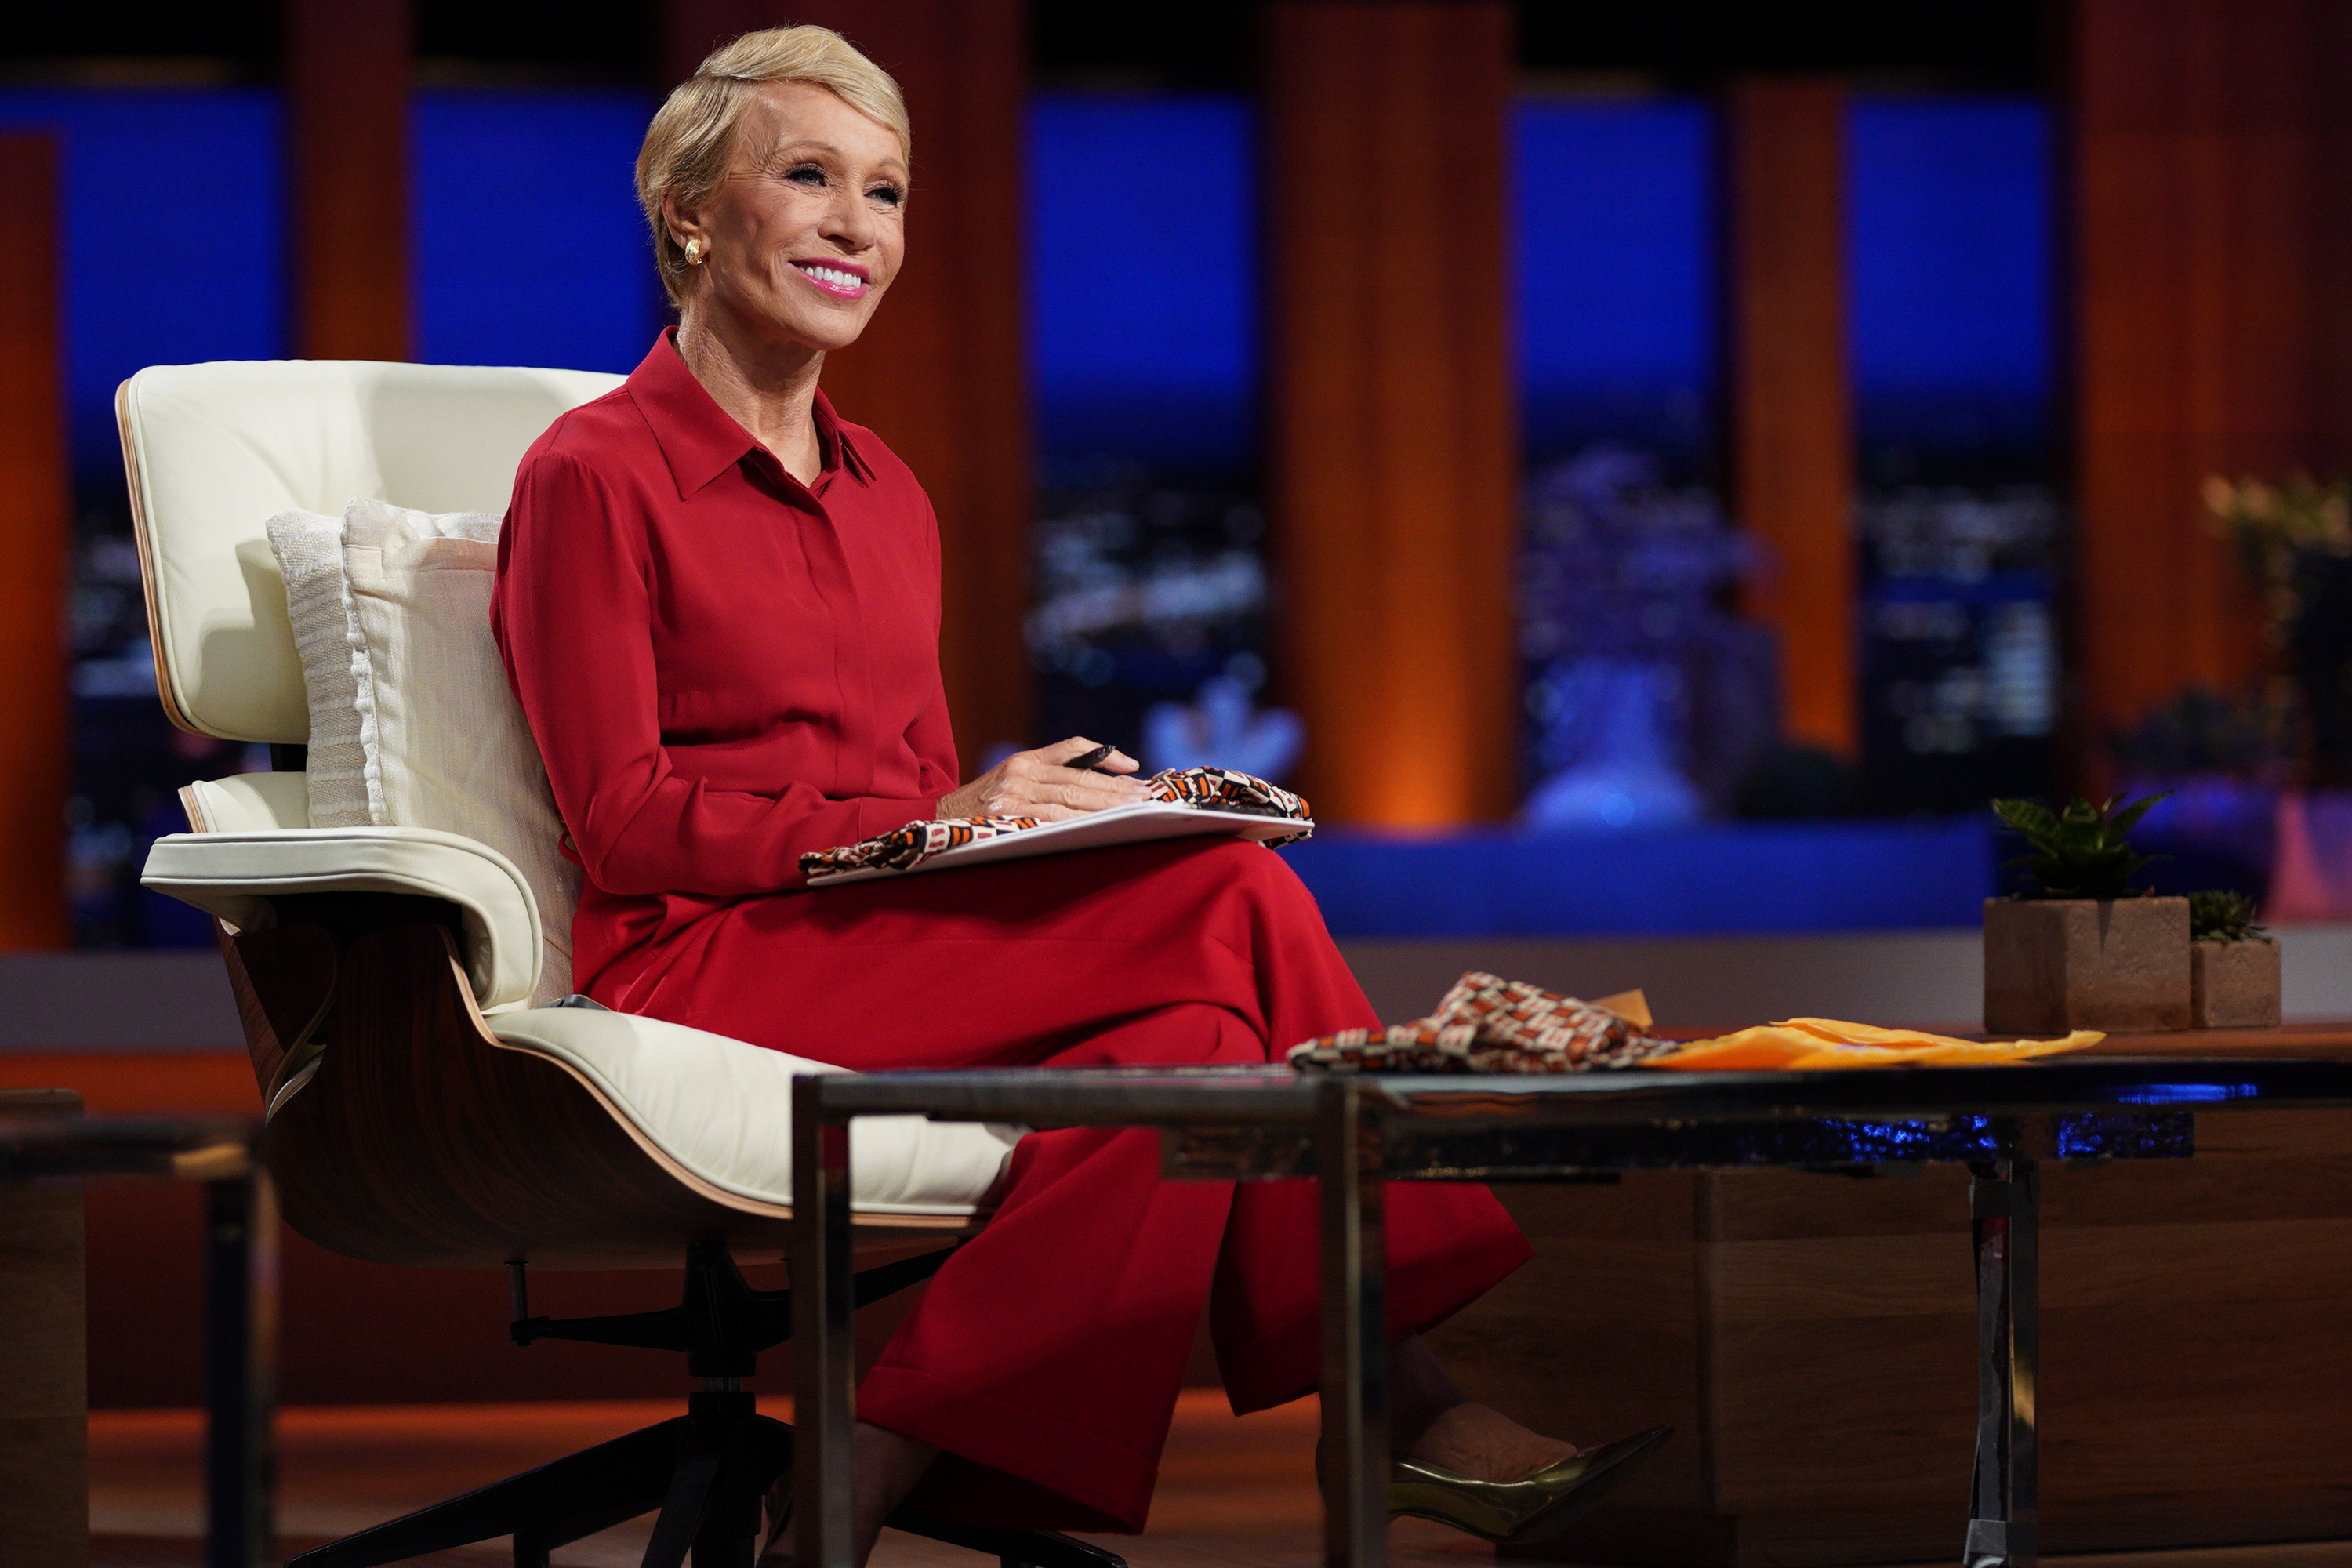 ‘Shark Tank’: Why Barbara Corcoran ‘Lost a Ton of Money’ for 2 Years on the Show